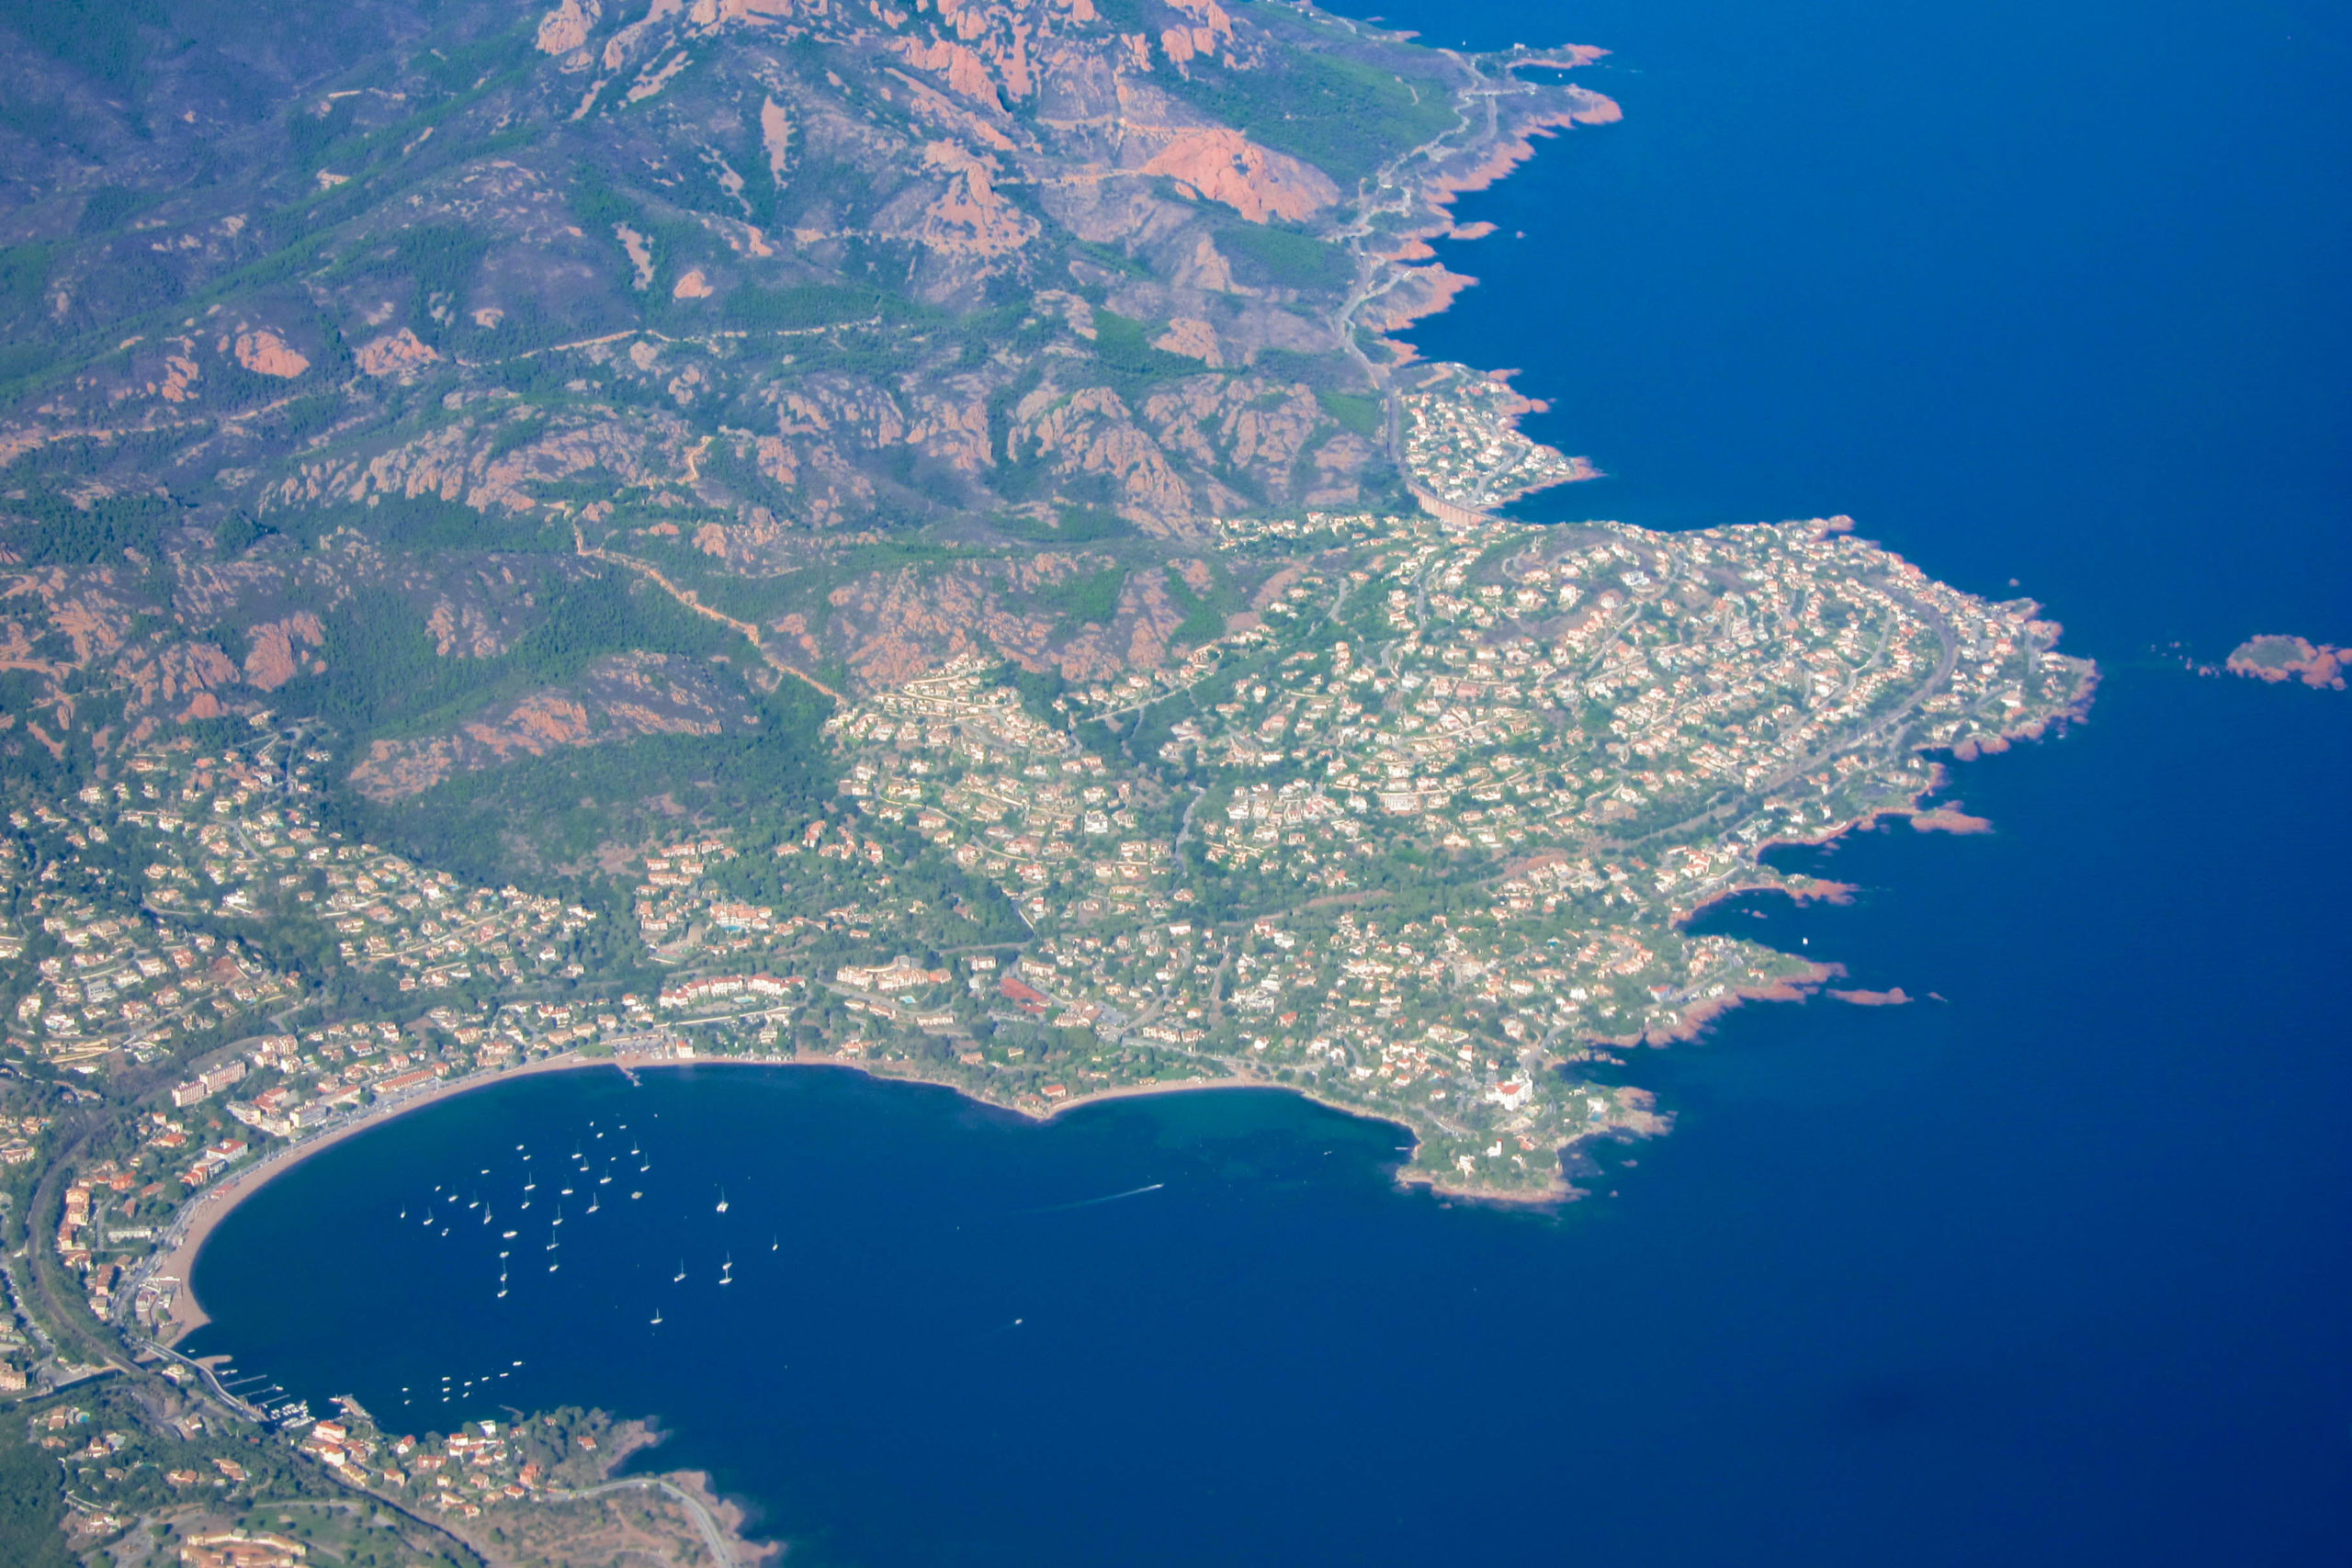 Esterel corniche road - Agay and Anthéor from above © Olivier Cleynen - licence [CC BY-SA 3.0] from Wikimedia Commons